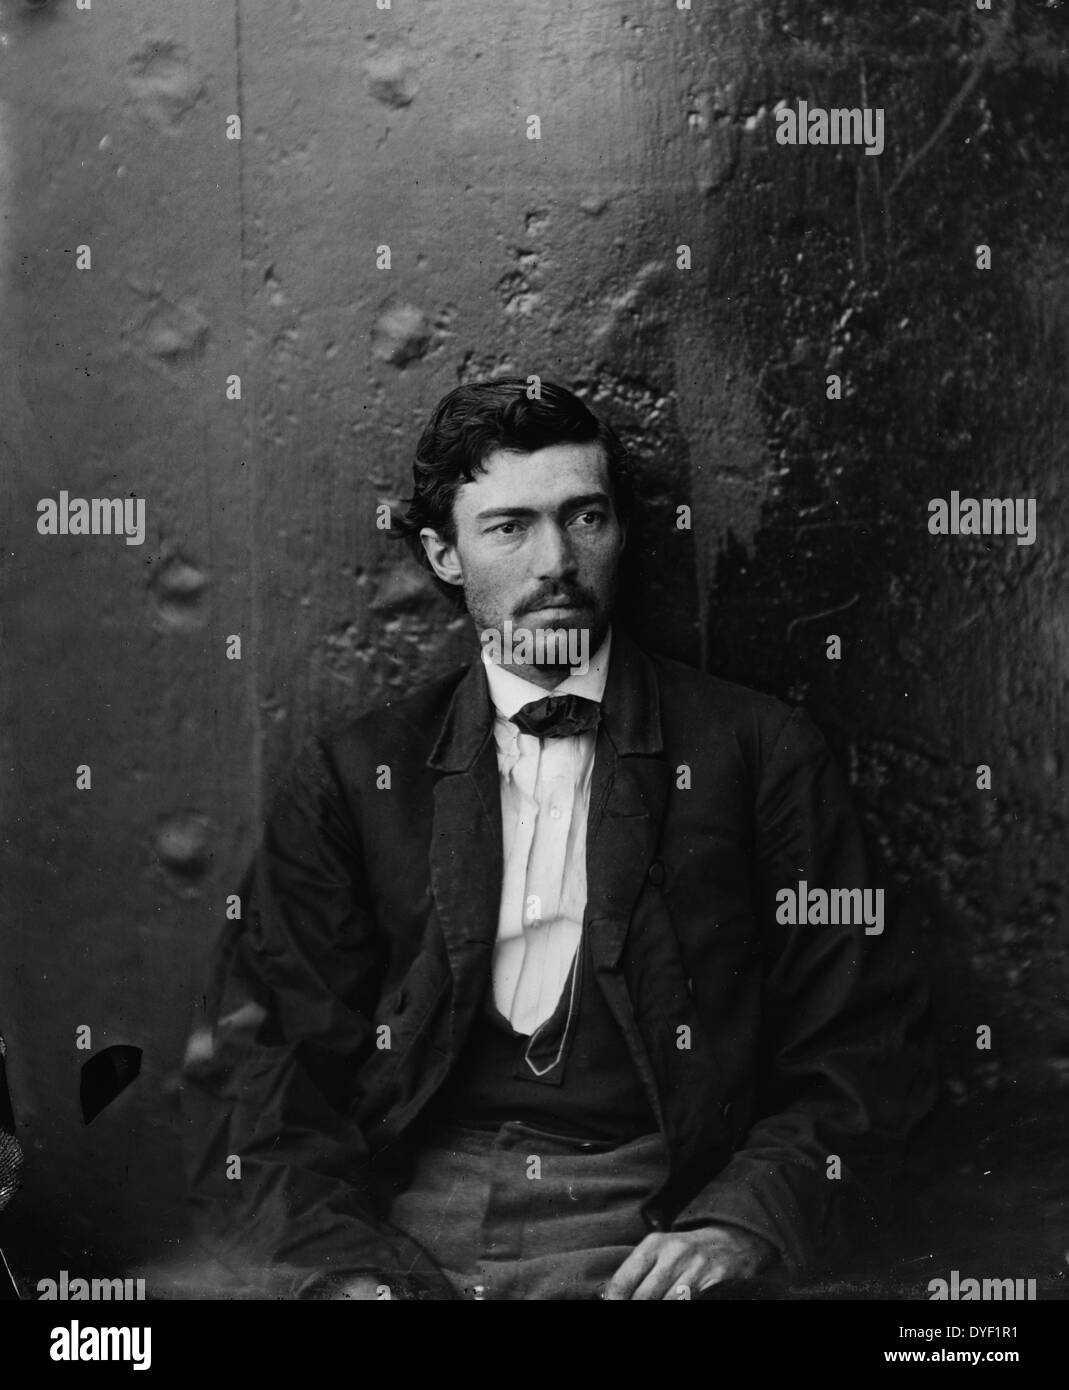 Samuel Bland Arnold (September 6, 1834 – September 21, 1906) was involved in the plot to kidnap President Abraham Lincoln in 1865. He and the other conspirators, John Wilkes Booth, David Herold, Lewis Powell, Michael O'Laughlen and John Surratt, were to kidnap Lincoln and hold him to exchange for the Confederate prisoners in Washington D.C. This photograph has backgrounds of dark metal, and was presumably taken on the monitors, U.S.S. Montauk and Saugus, where the conspirators were for a time confined. Stock Photo